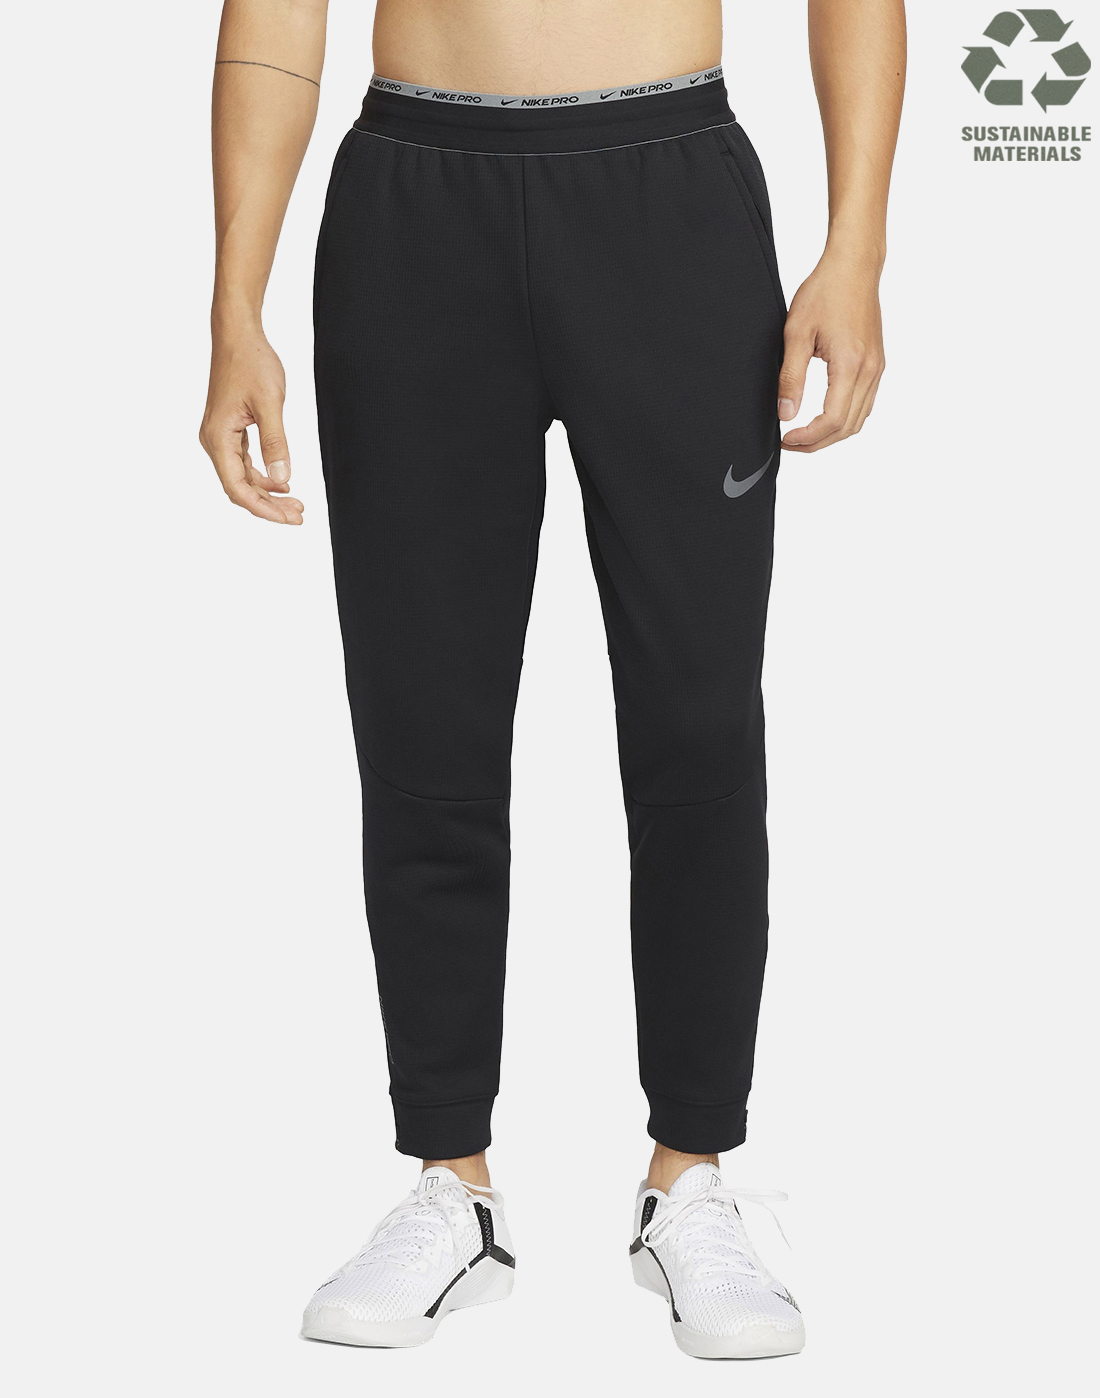 Nike Mens Therma Sphere Pant - Black | Life Style Sports IE